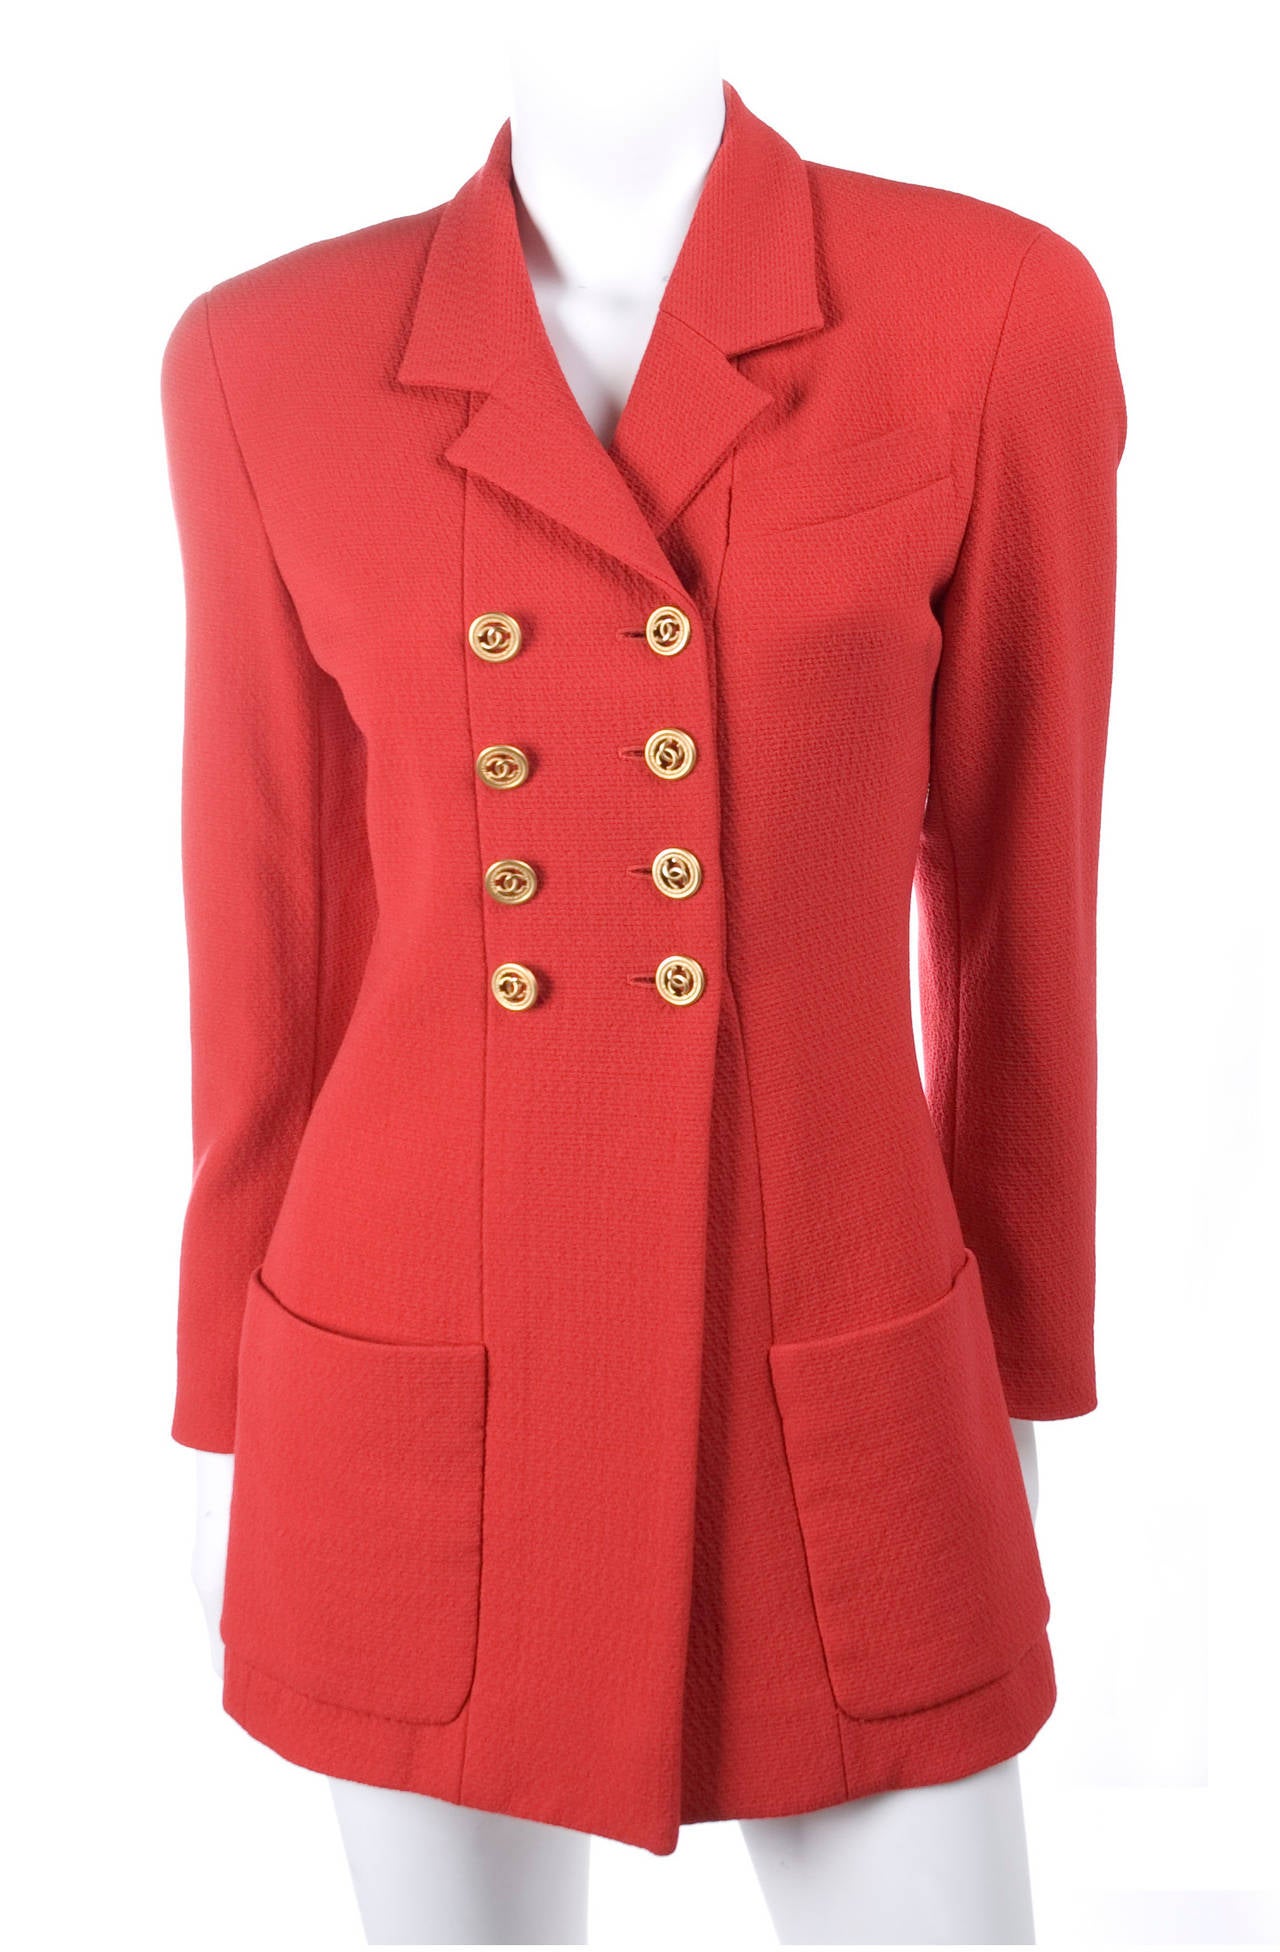 Vintage 1980s Chanel Jacket in Lipstick Red and Gold Buttons at 1stdibs